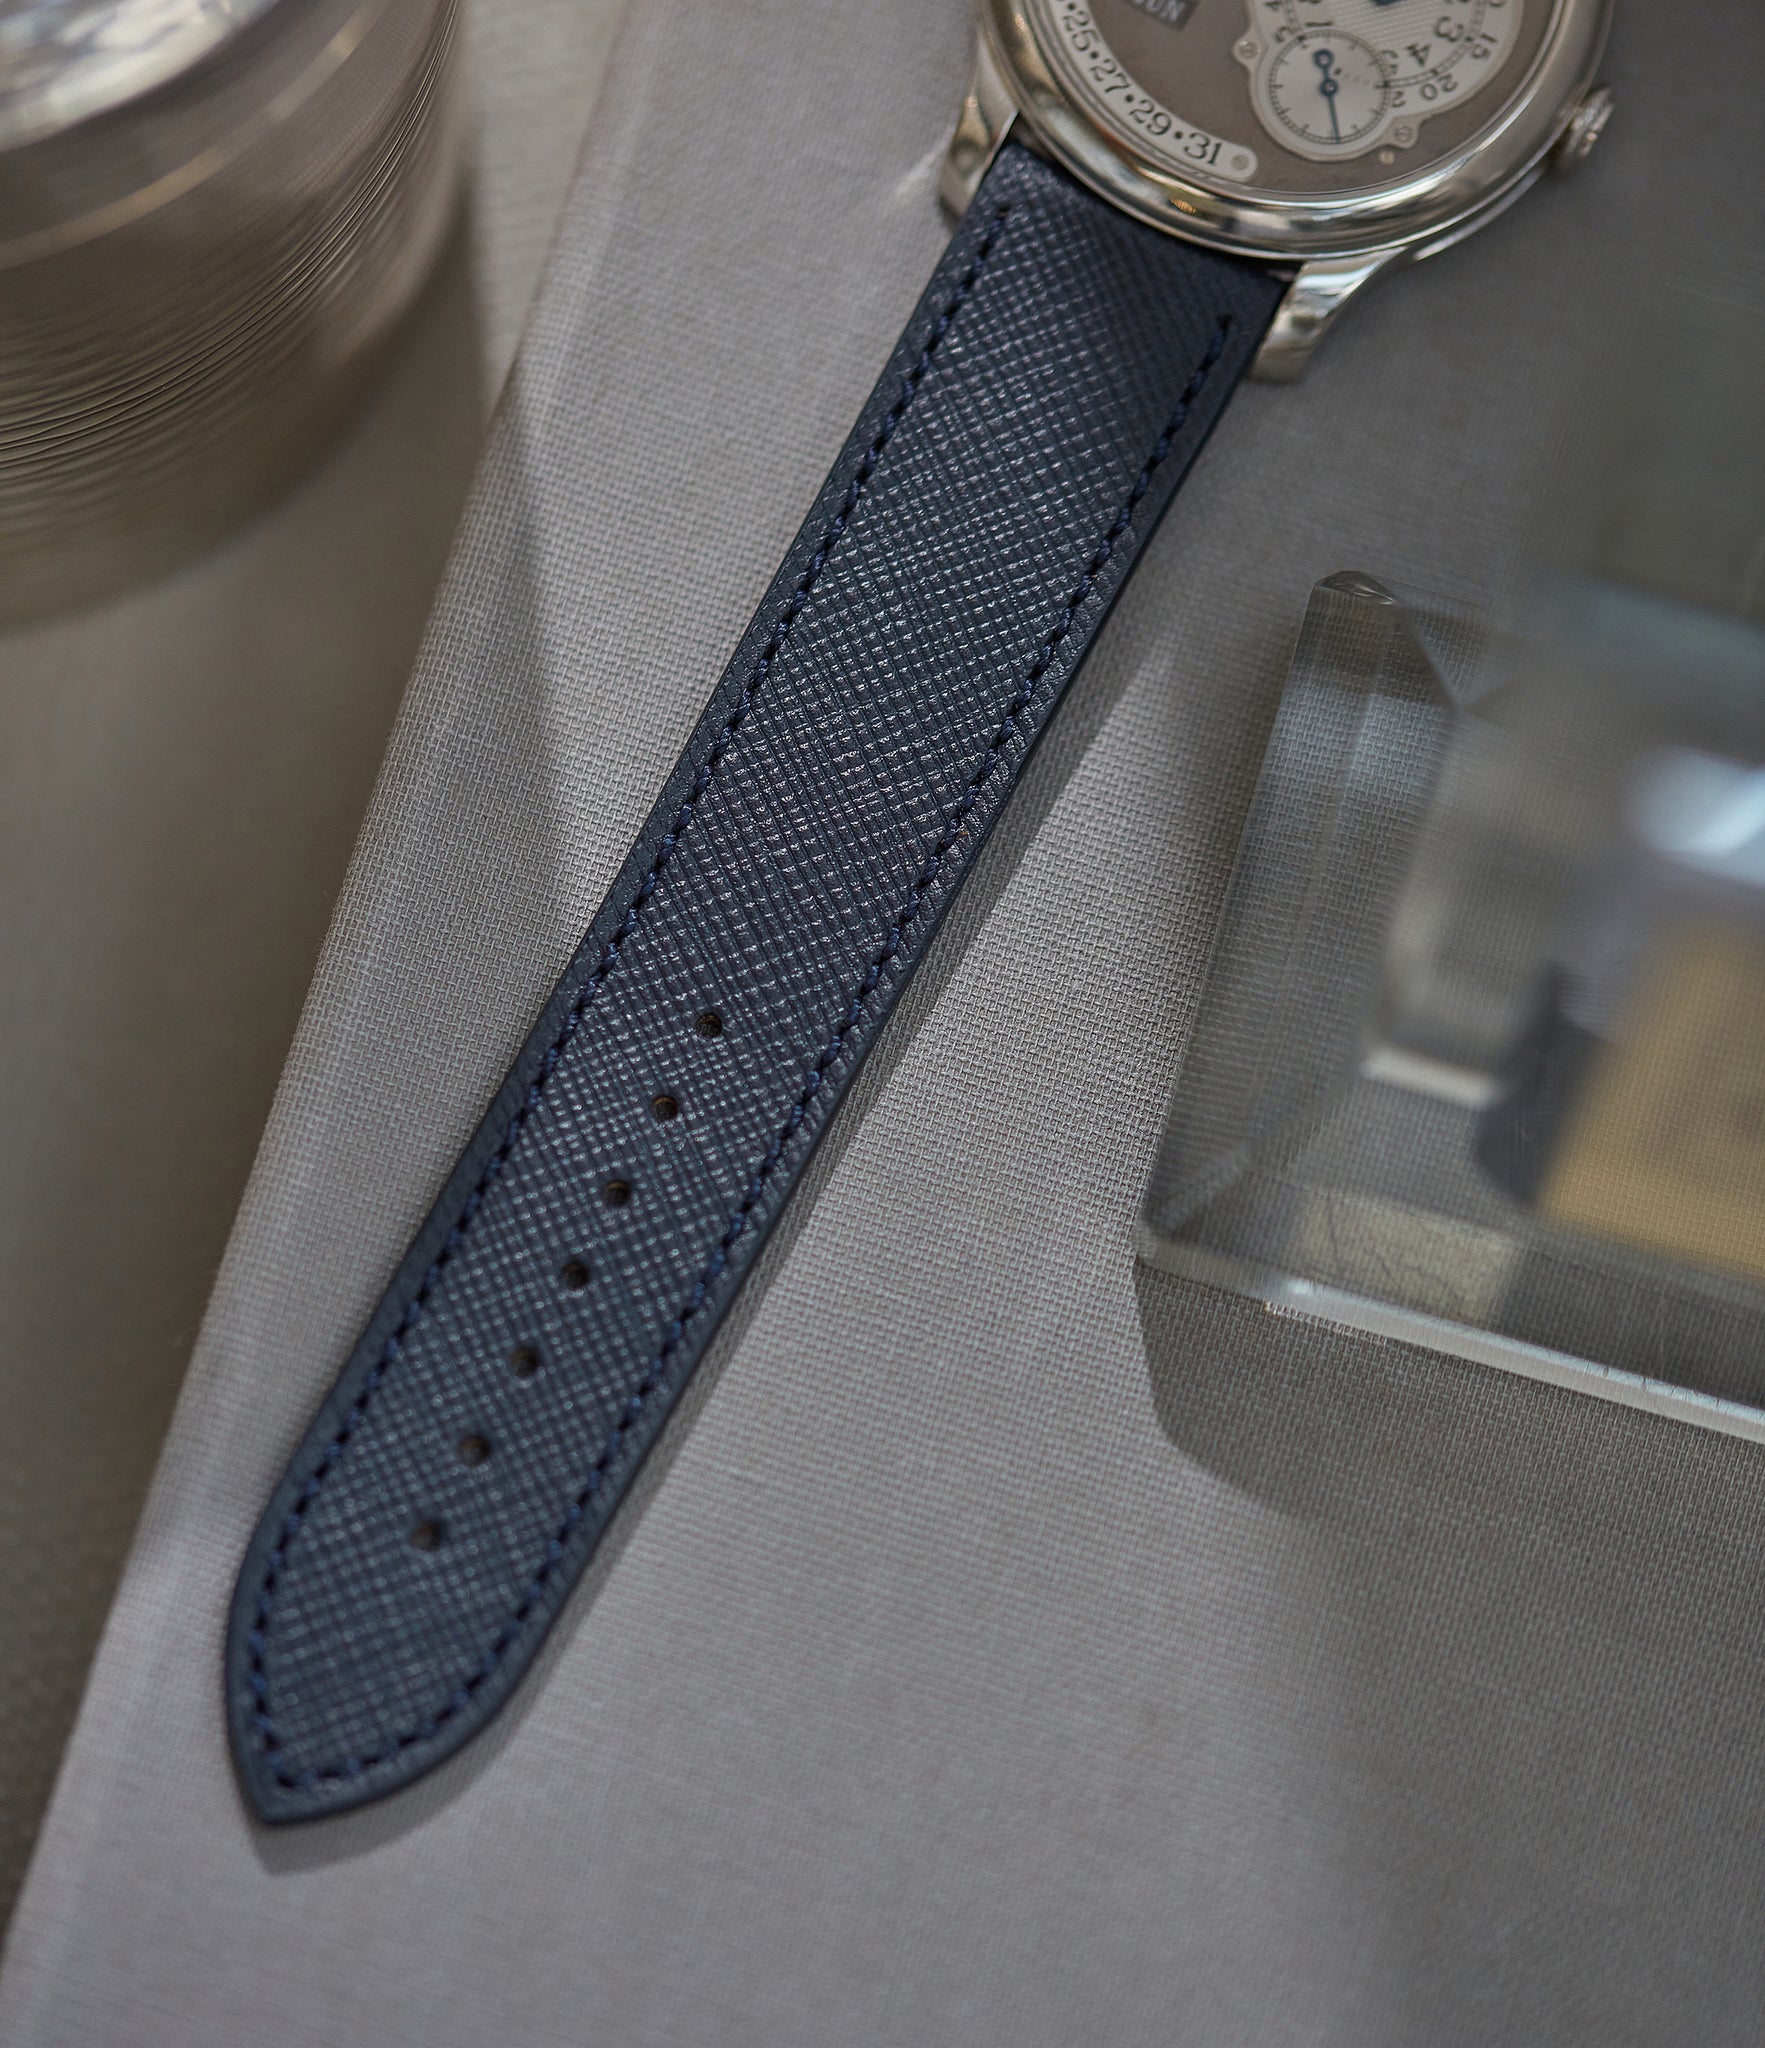 Buy 20mm x 19mm Porto Molequin curved watch strap Saffiano navy blue calfskin leather quick-release springbars buckle handcrafted European-made for sale online at A Collected Man London